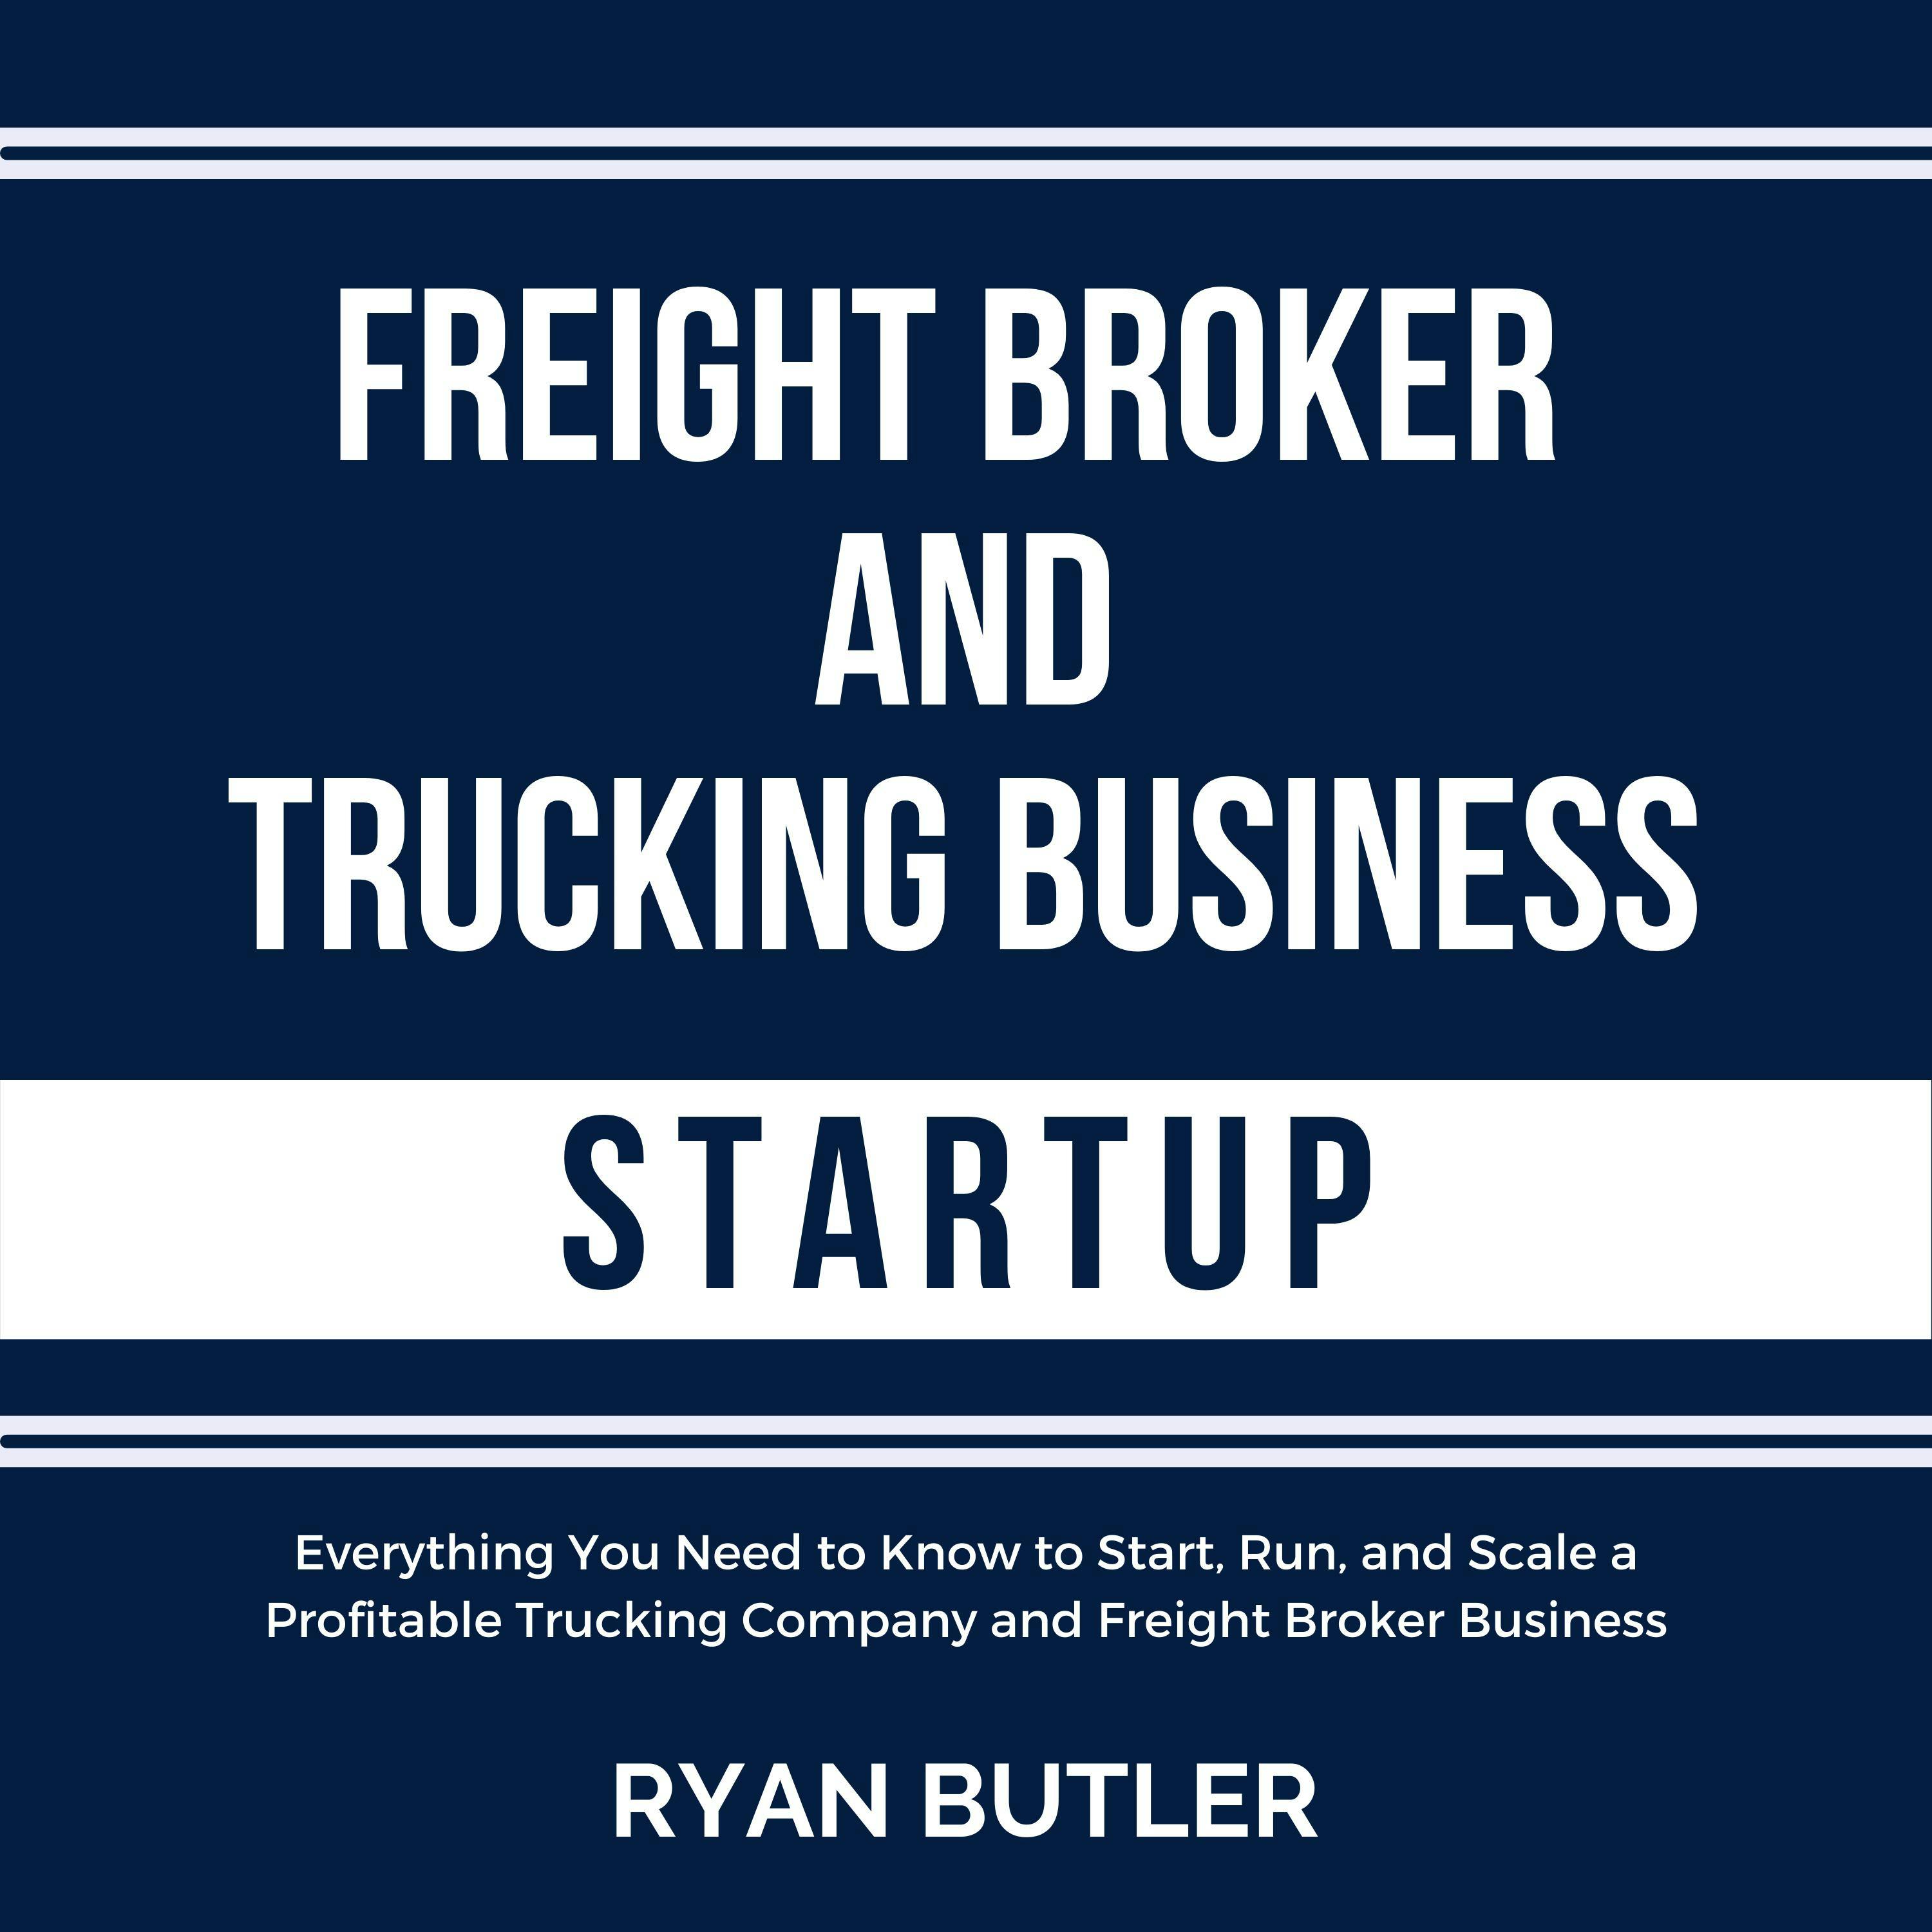 Freight Broker and Trucking Business Startup: Everything You Need to Know to Start, Run, and Scale a Profitable Trucking Company and Freight Broker Business - undefined